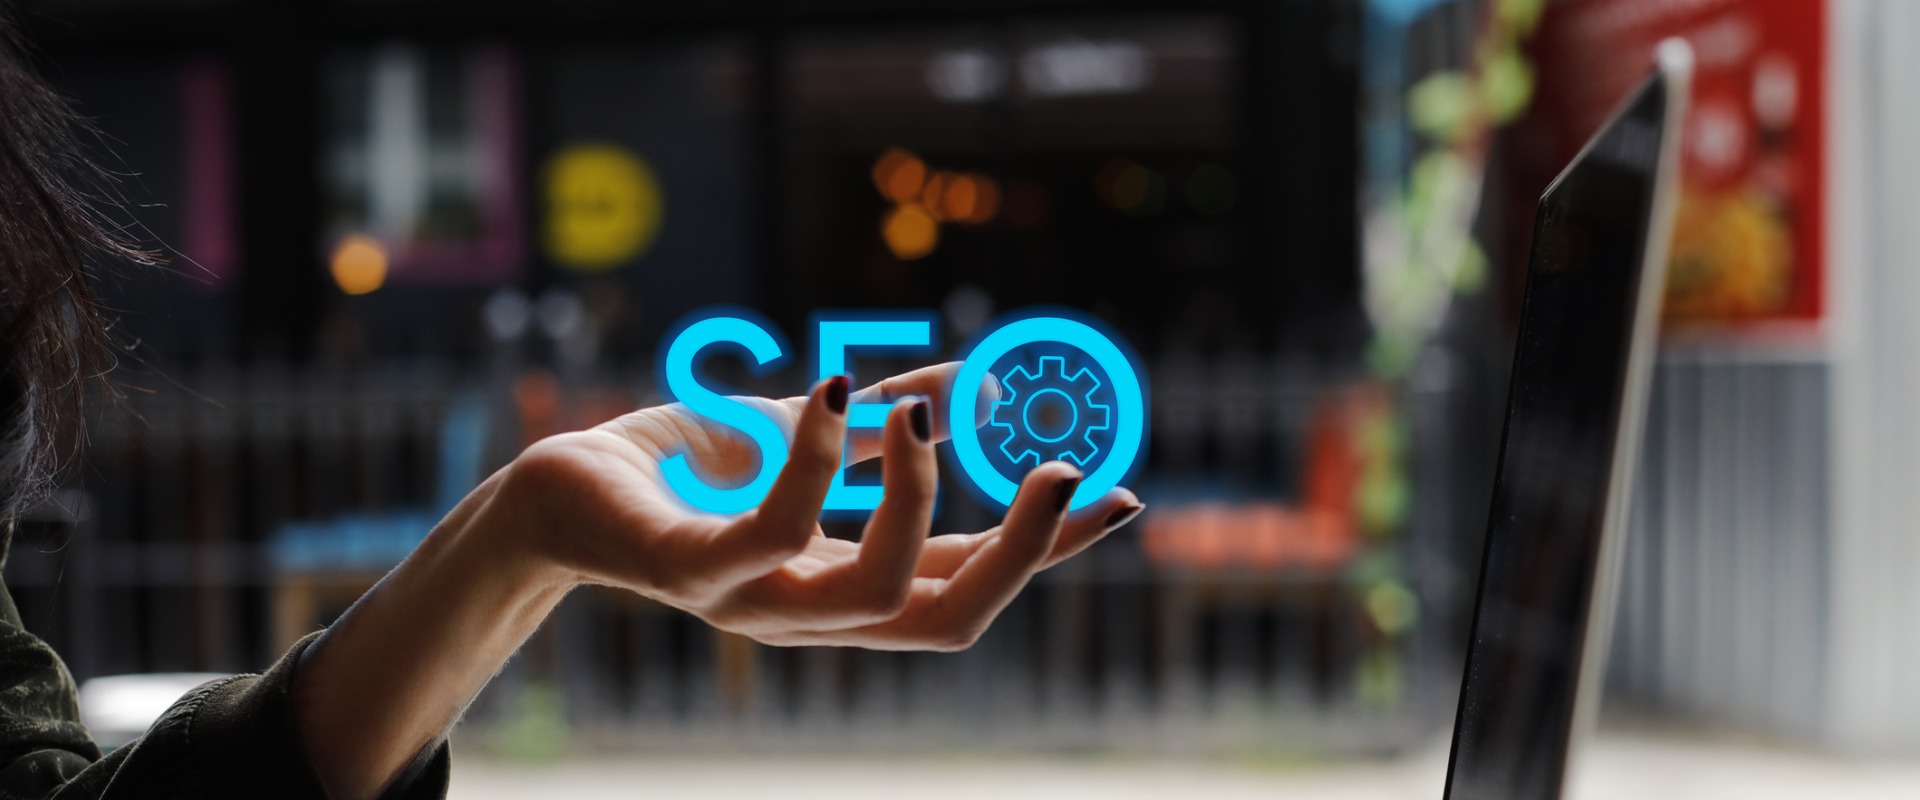 What are the important elements of seo?